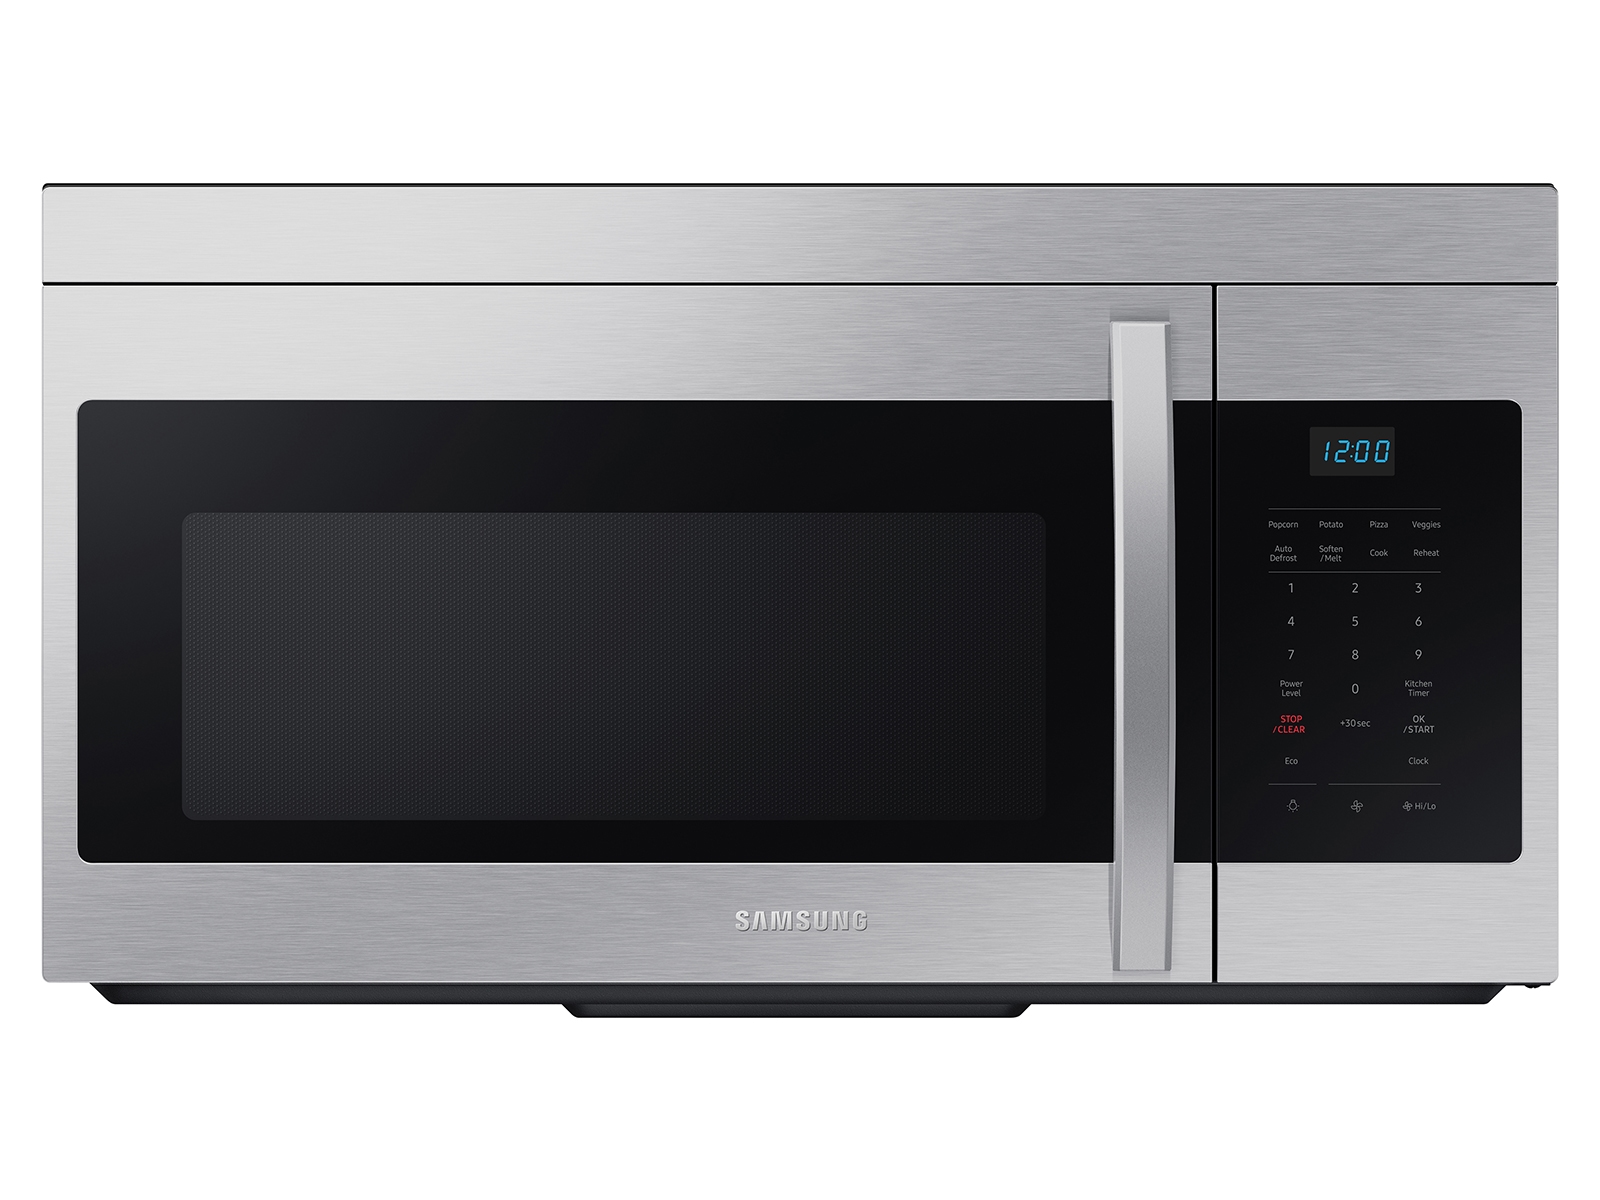 https://image-us.samsung.com/SamsungUS/home/home-appliances/microwaves/all/pdp/06242021/stainless/ME16A4021AS_01_Silver_SCOM.jpg?$product-details-jpg$